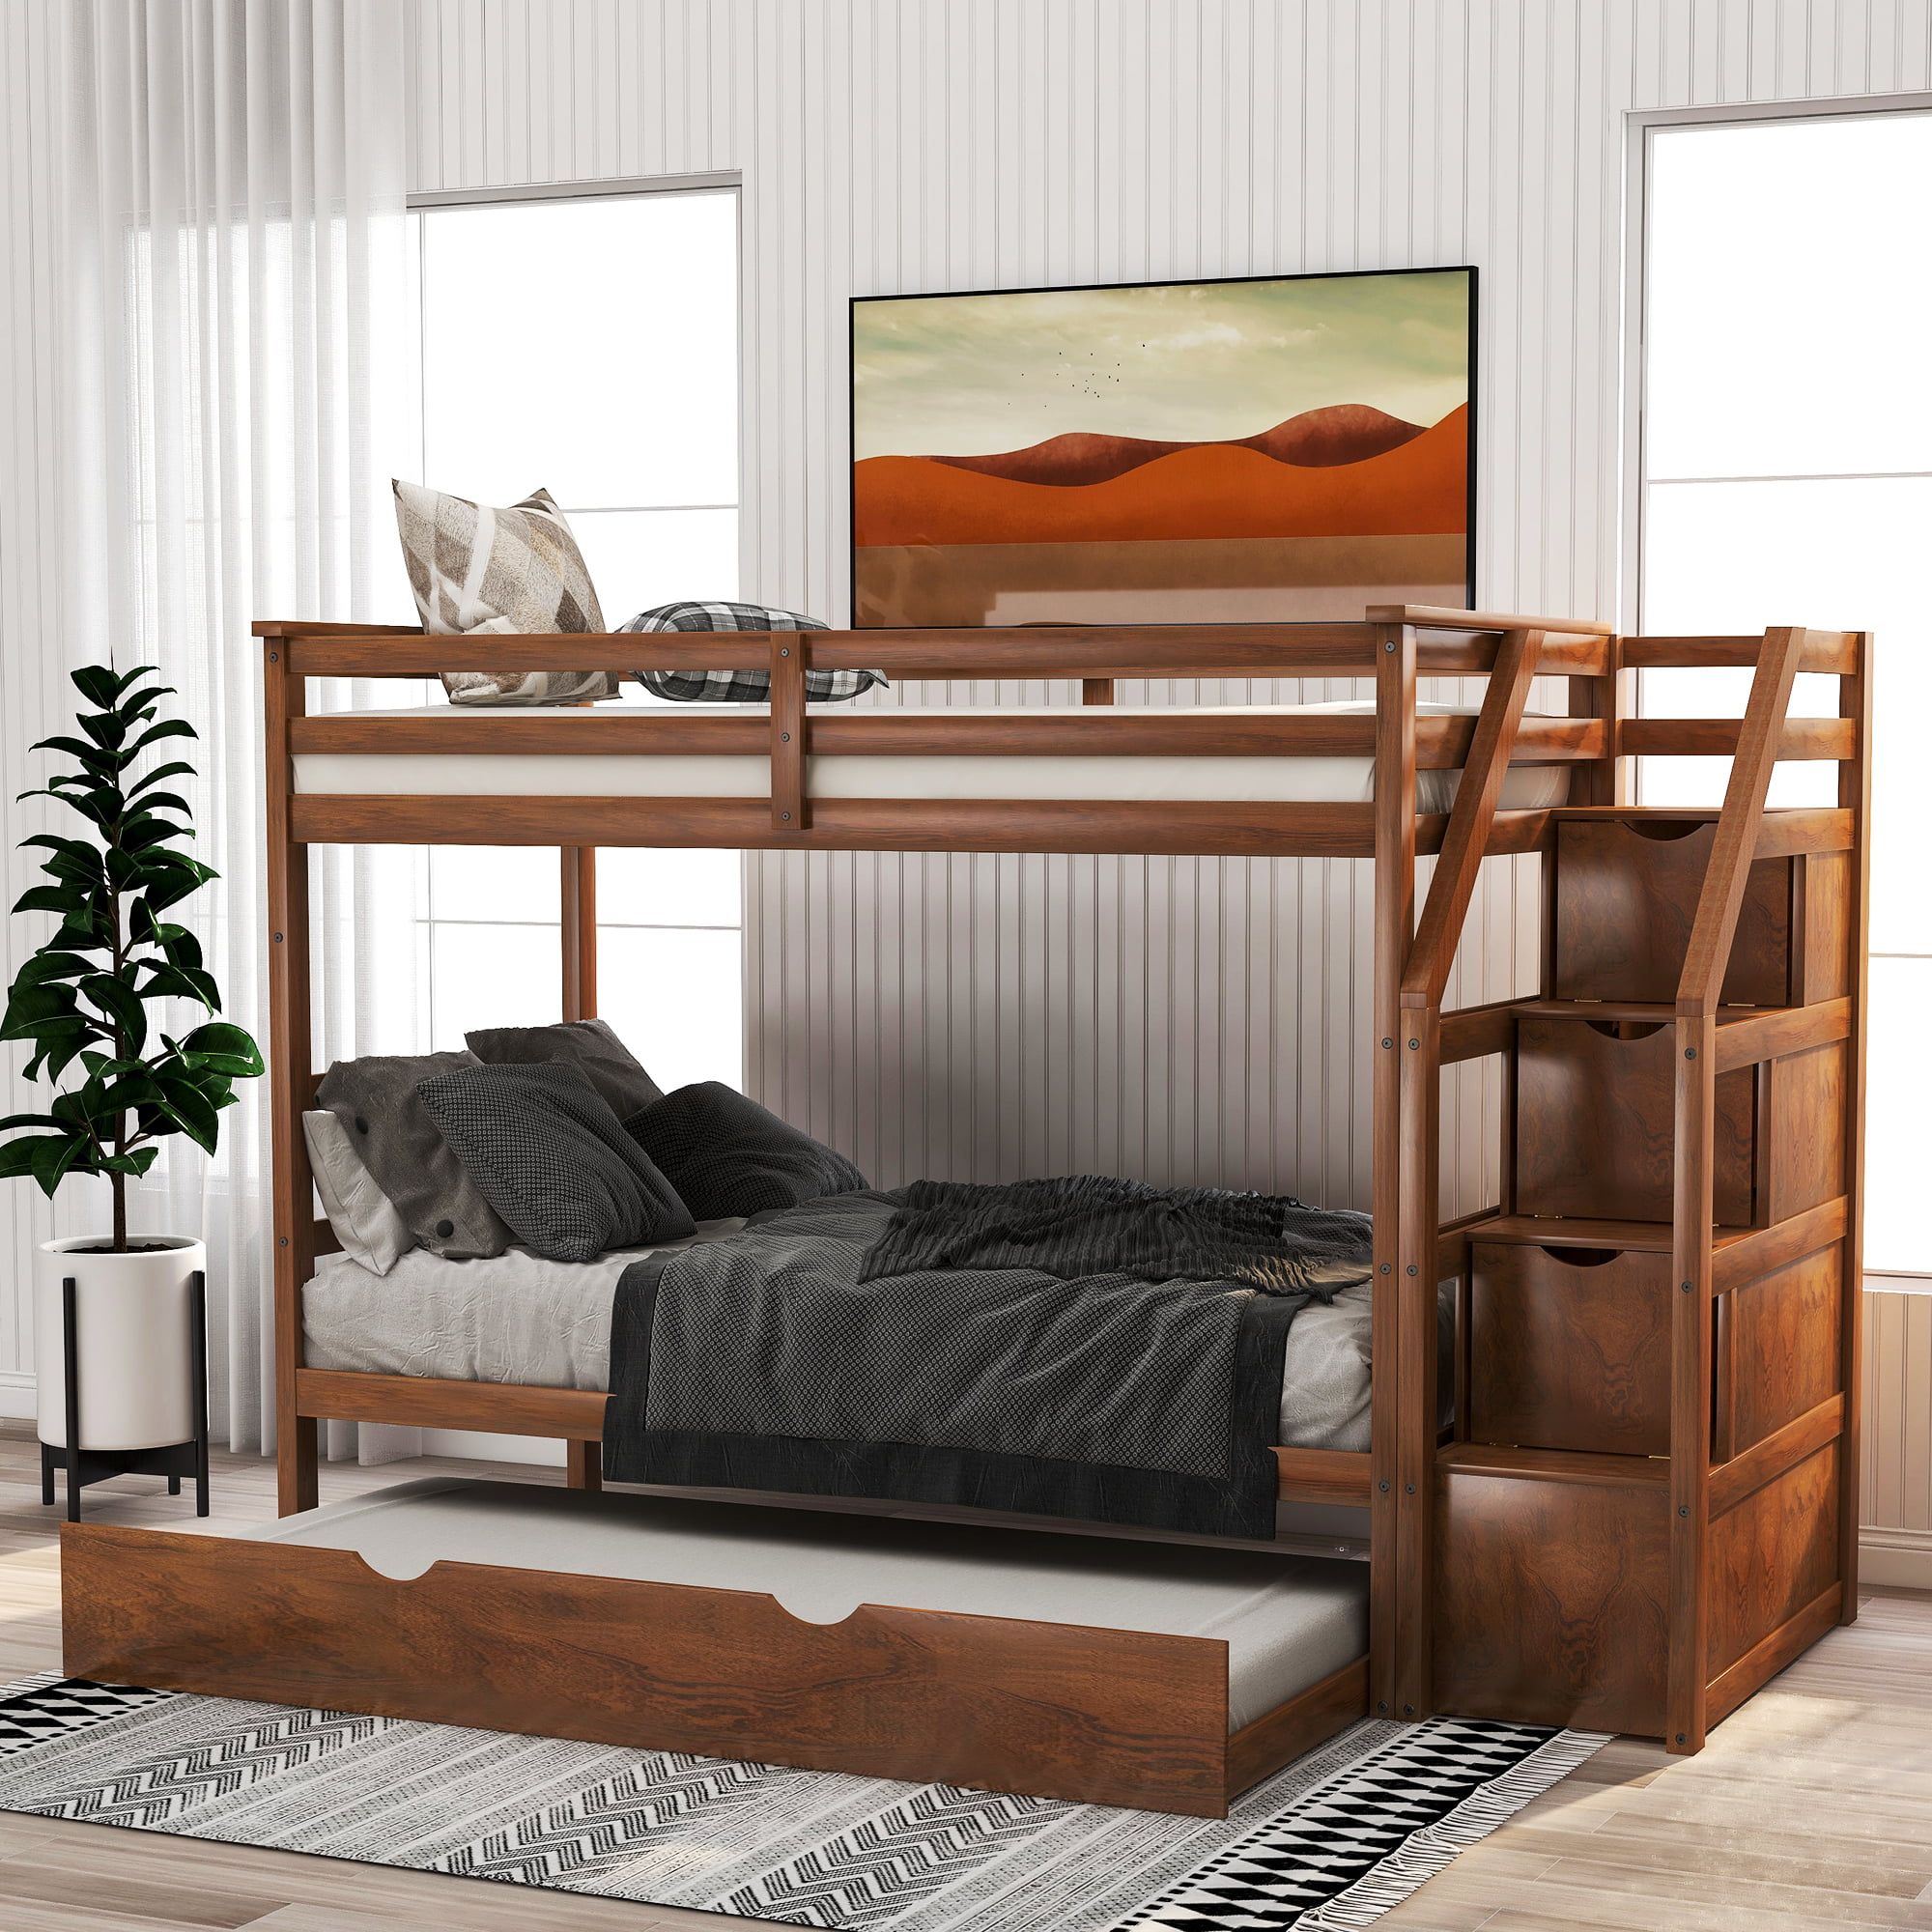 Lifcasual Twin Over Bunk Bed With, Captains Bunk Bed With Trundle